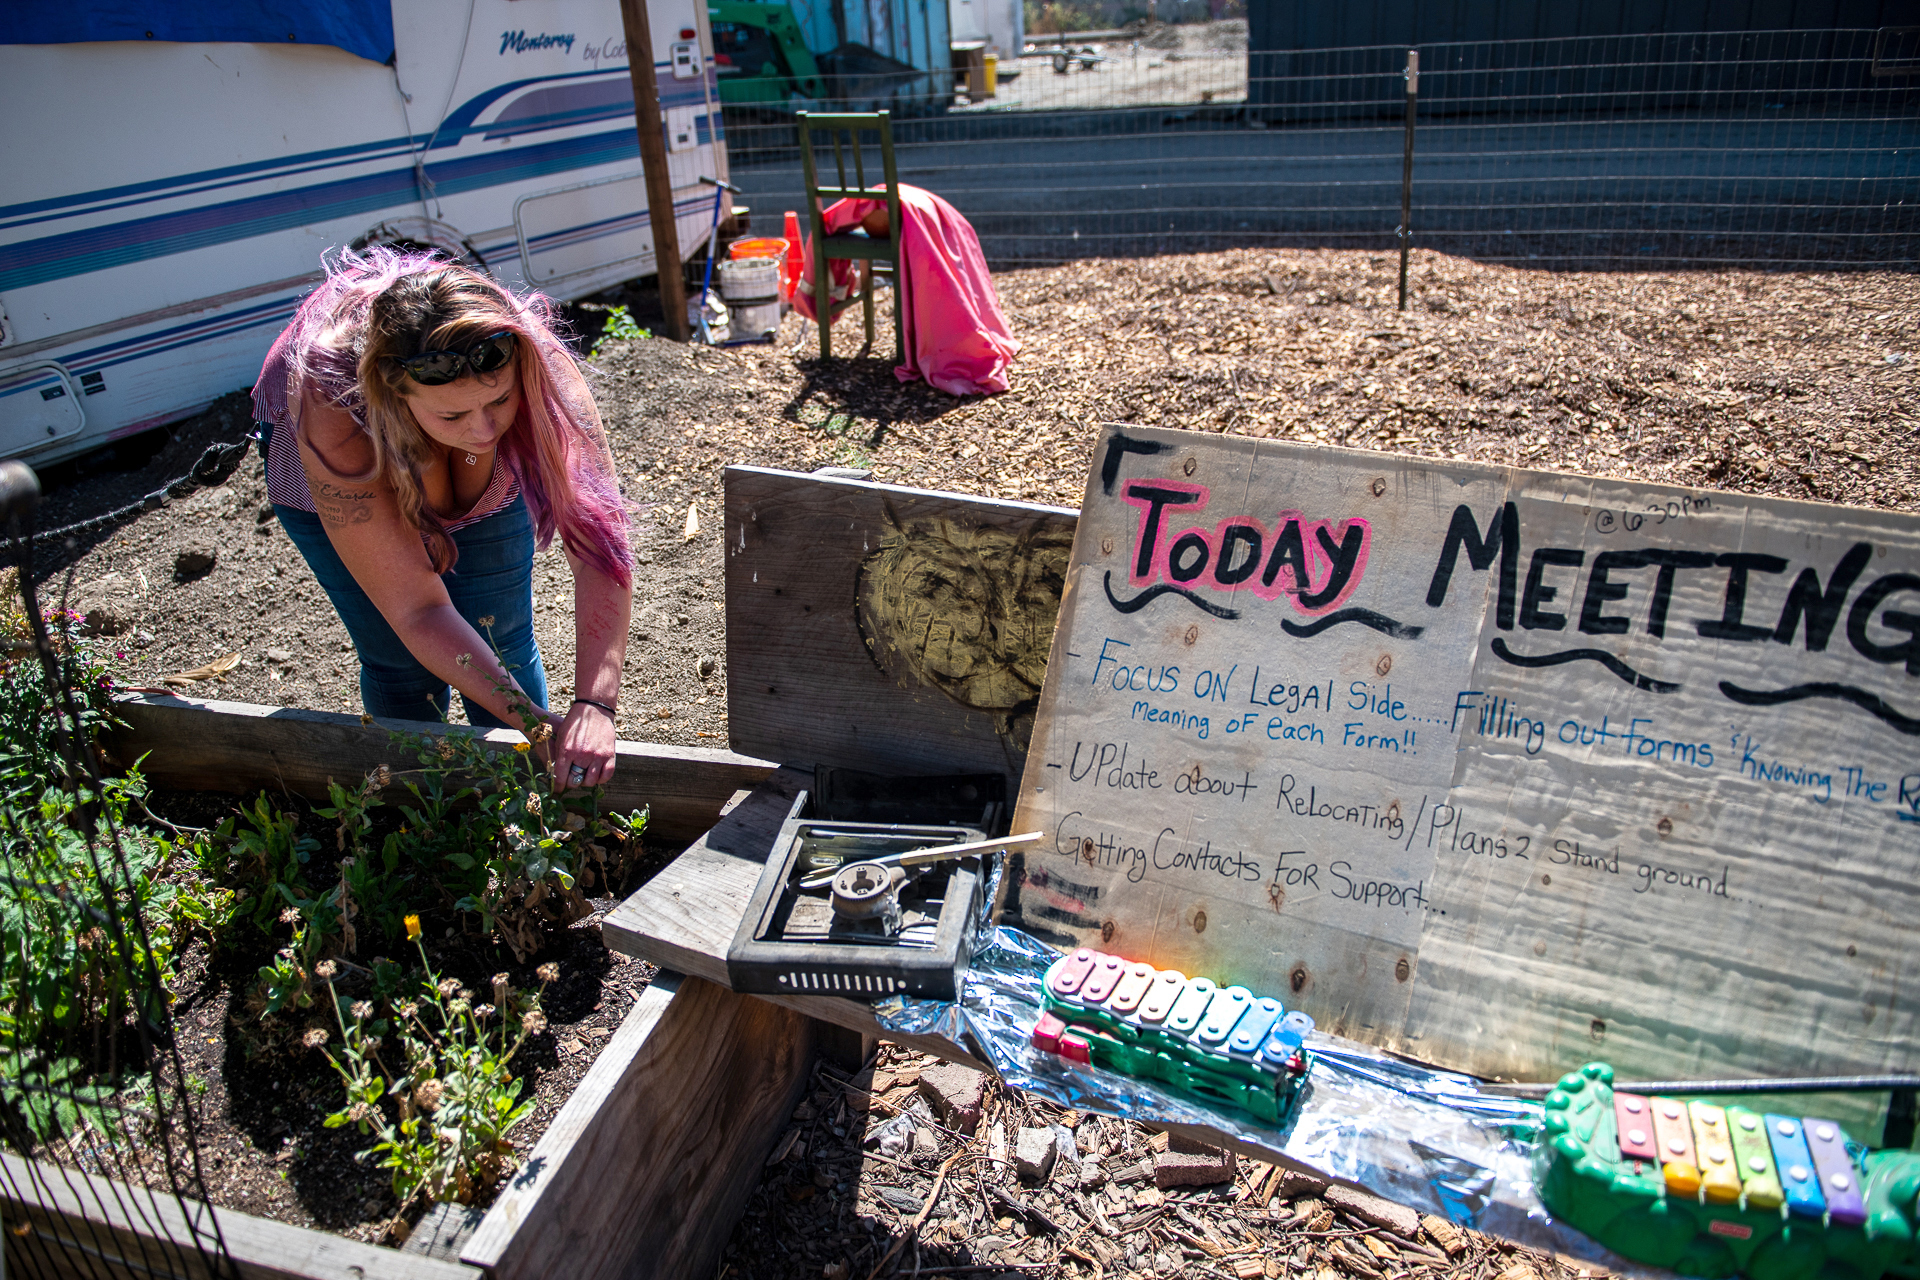 A woman in a pink T-shirt with blonde hair pulls weeds from a planter box that holds a sprouting garden. Little orange flowers are blossoming. A nearby white board reads, "Today Meeting." A trailer is seen to the left in the background.